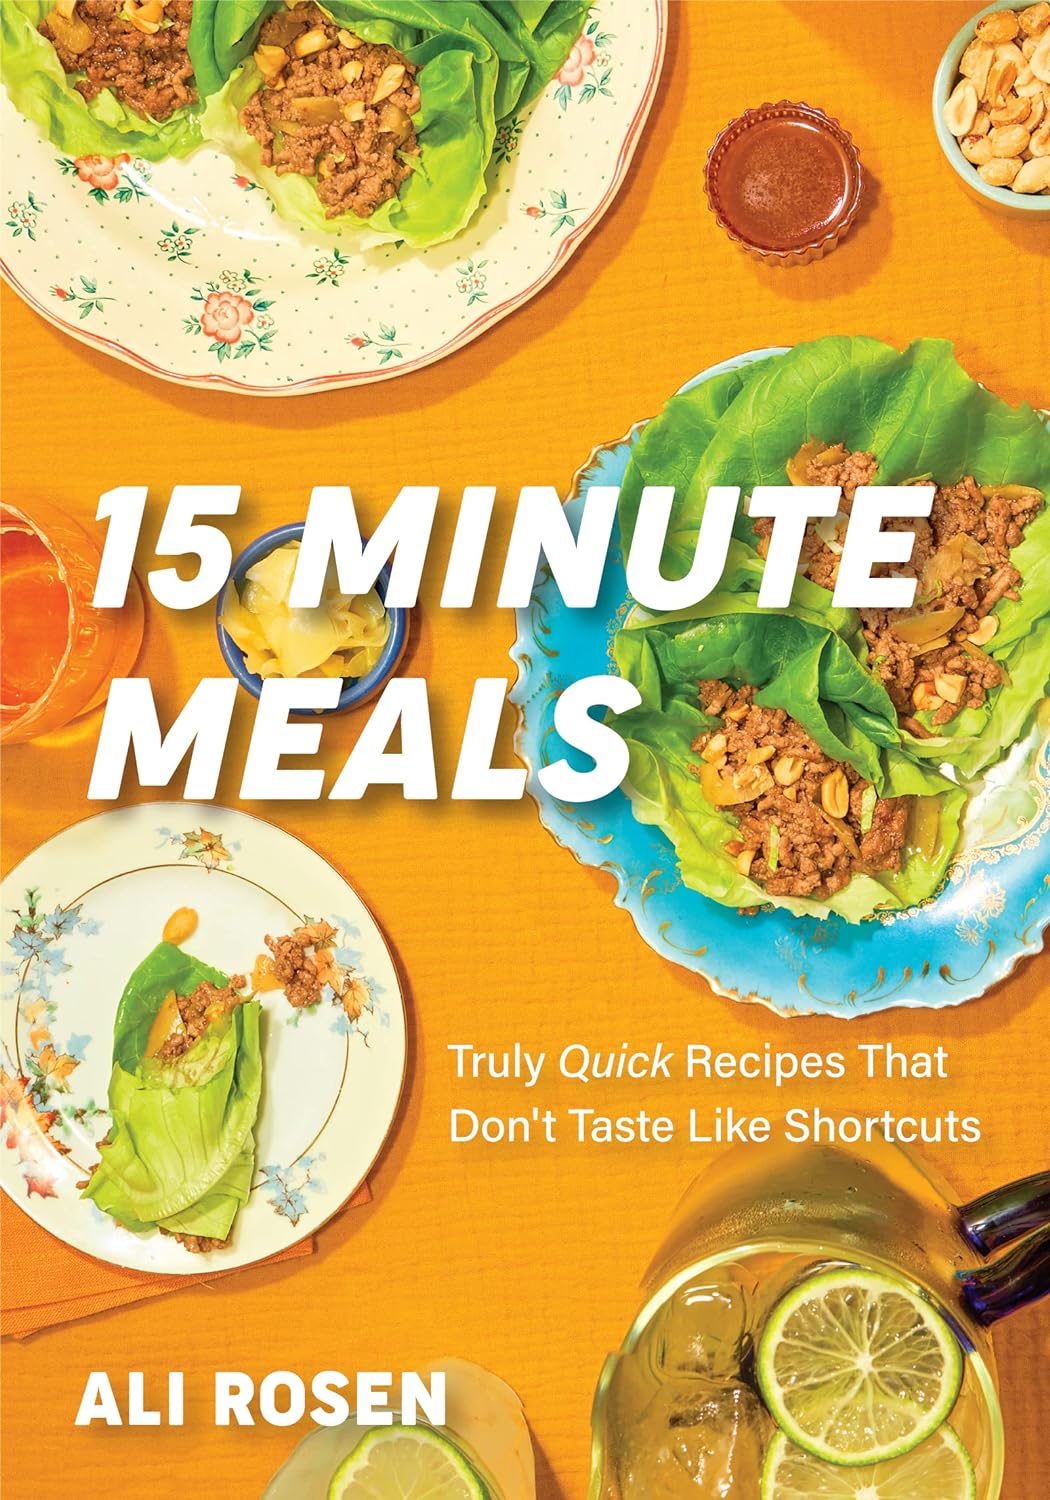 15 Minute Meals book cover